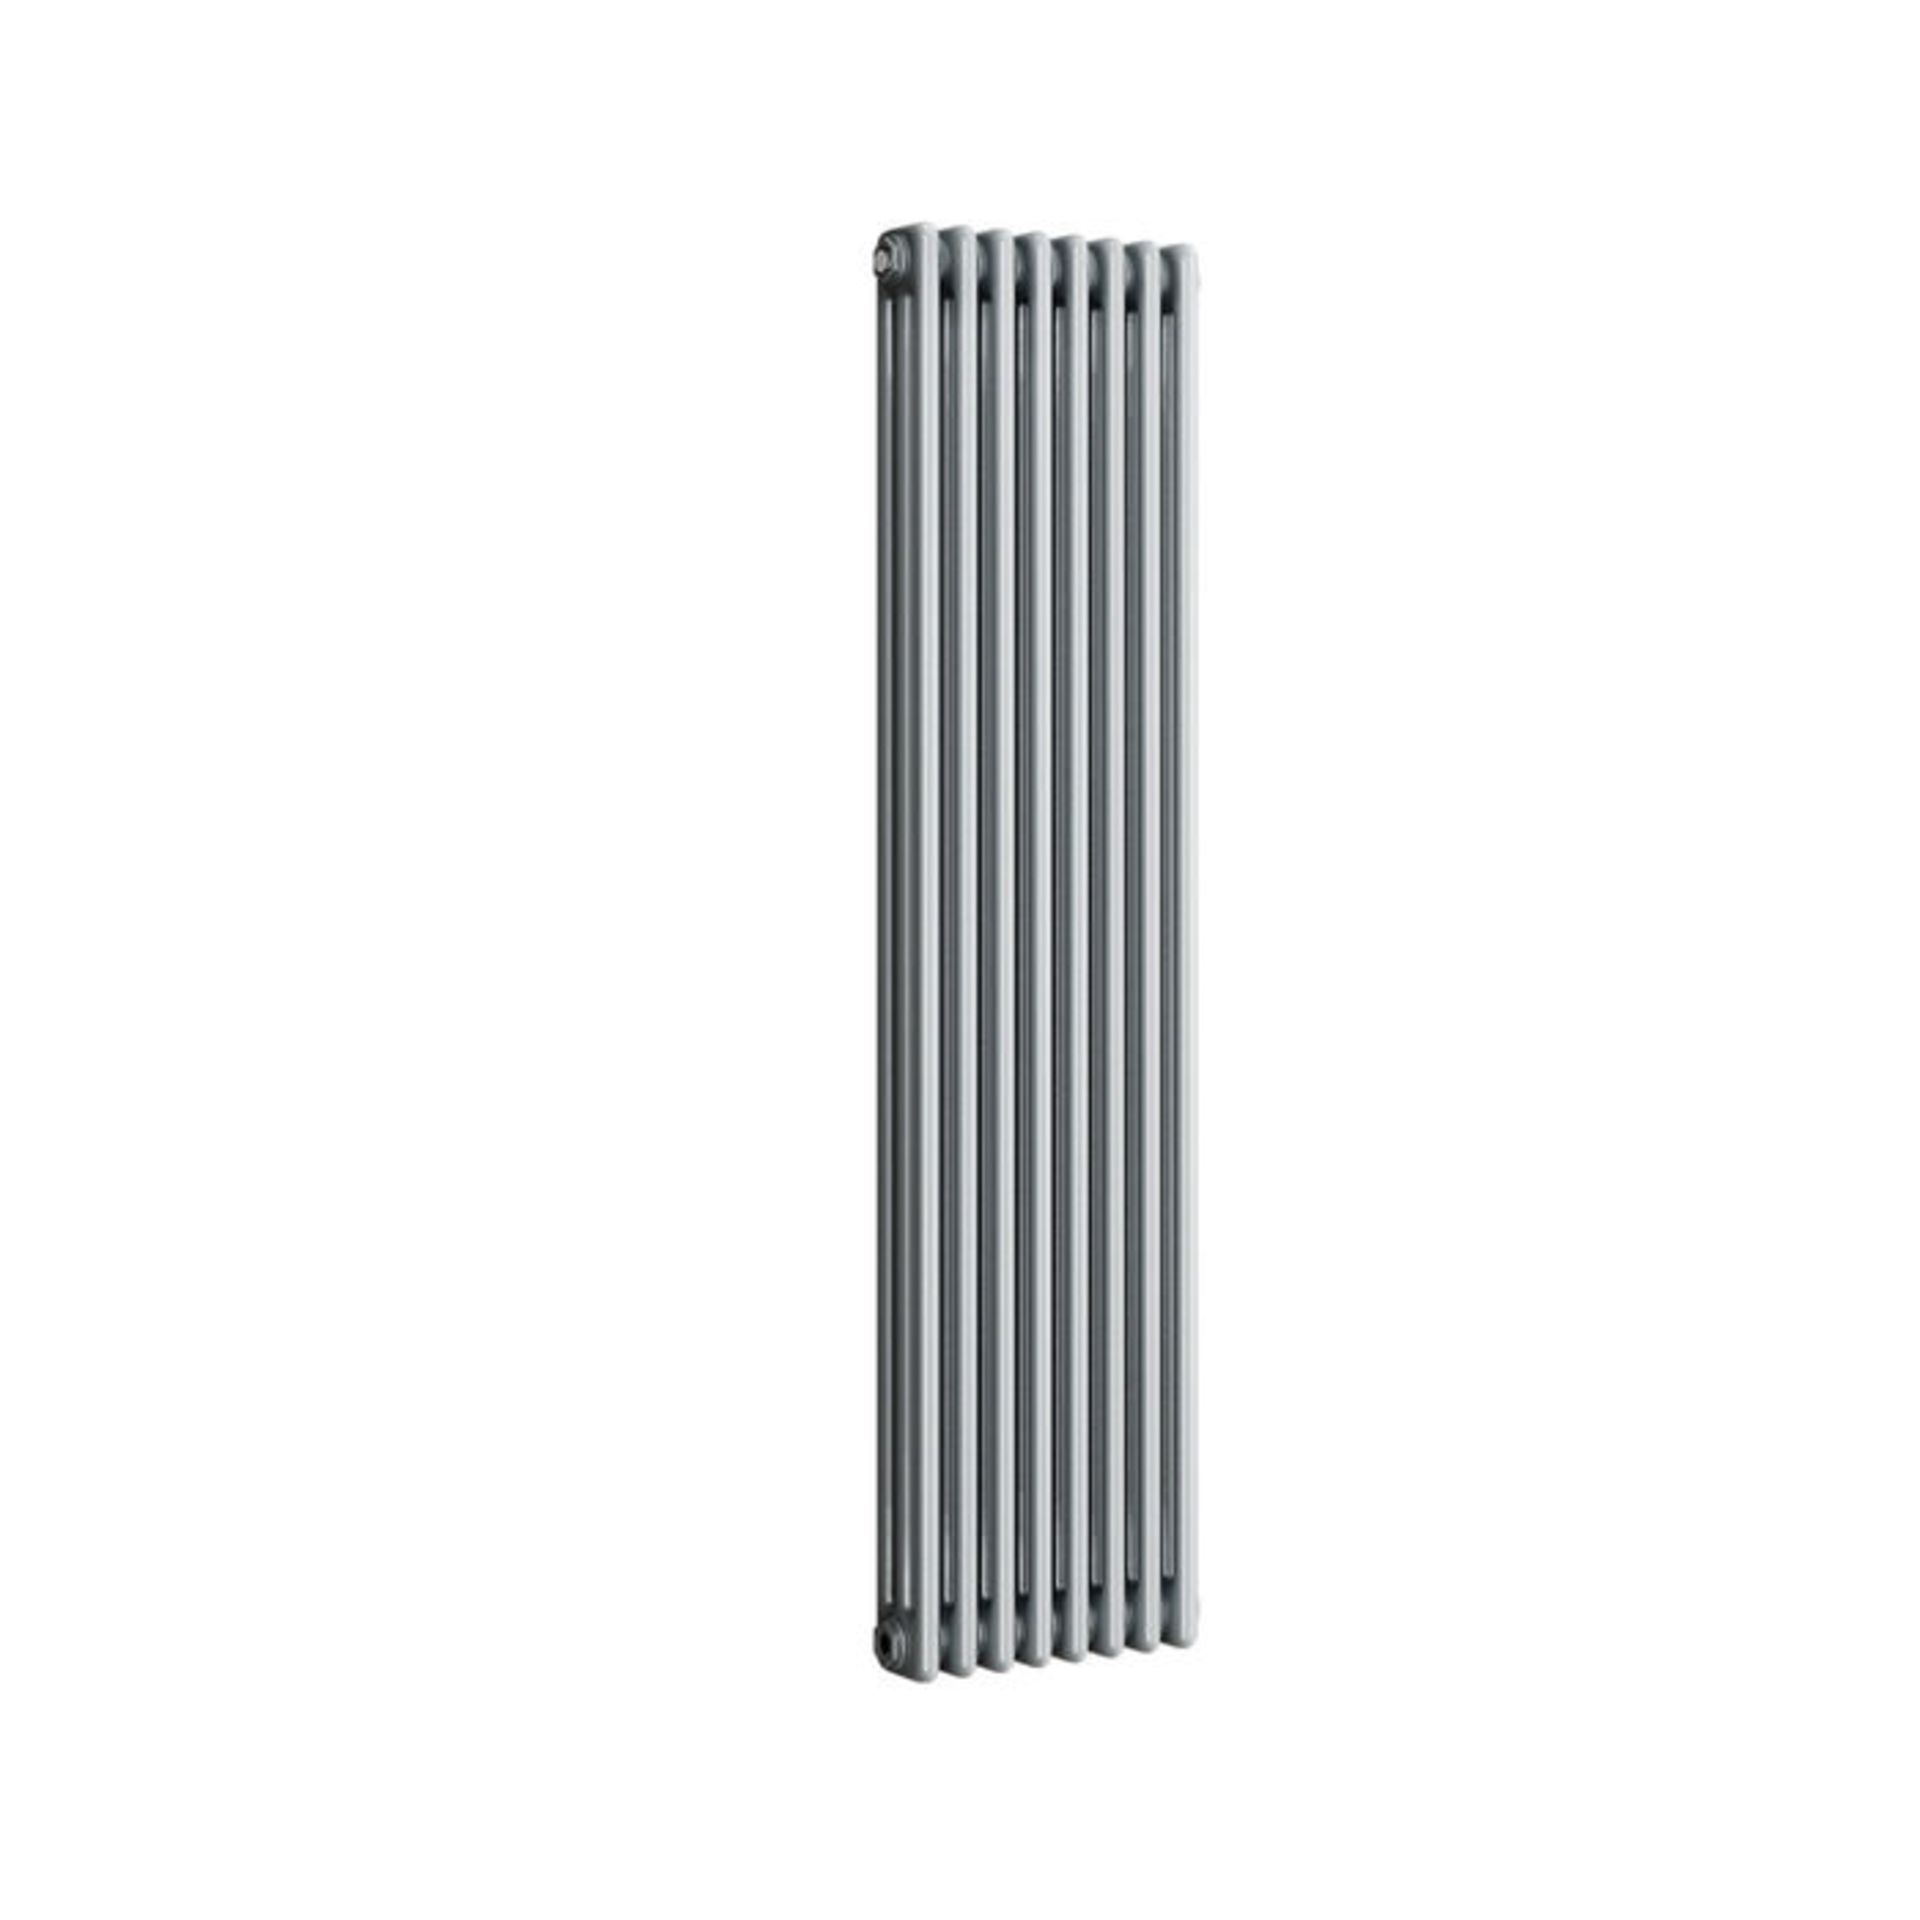 (VN42) 1500x380mm Earl Grey Triple Panel Vertical Colosseum Traditional Radiator. RRP £386.99. - Image 4 of 4